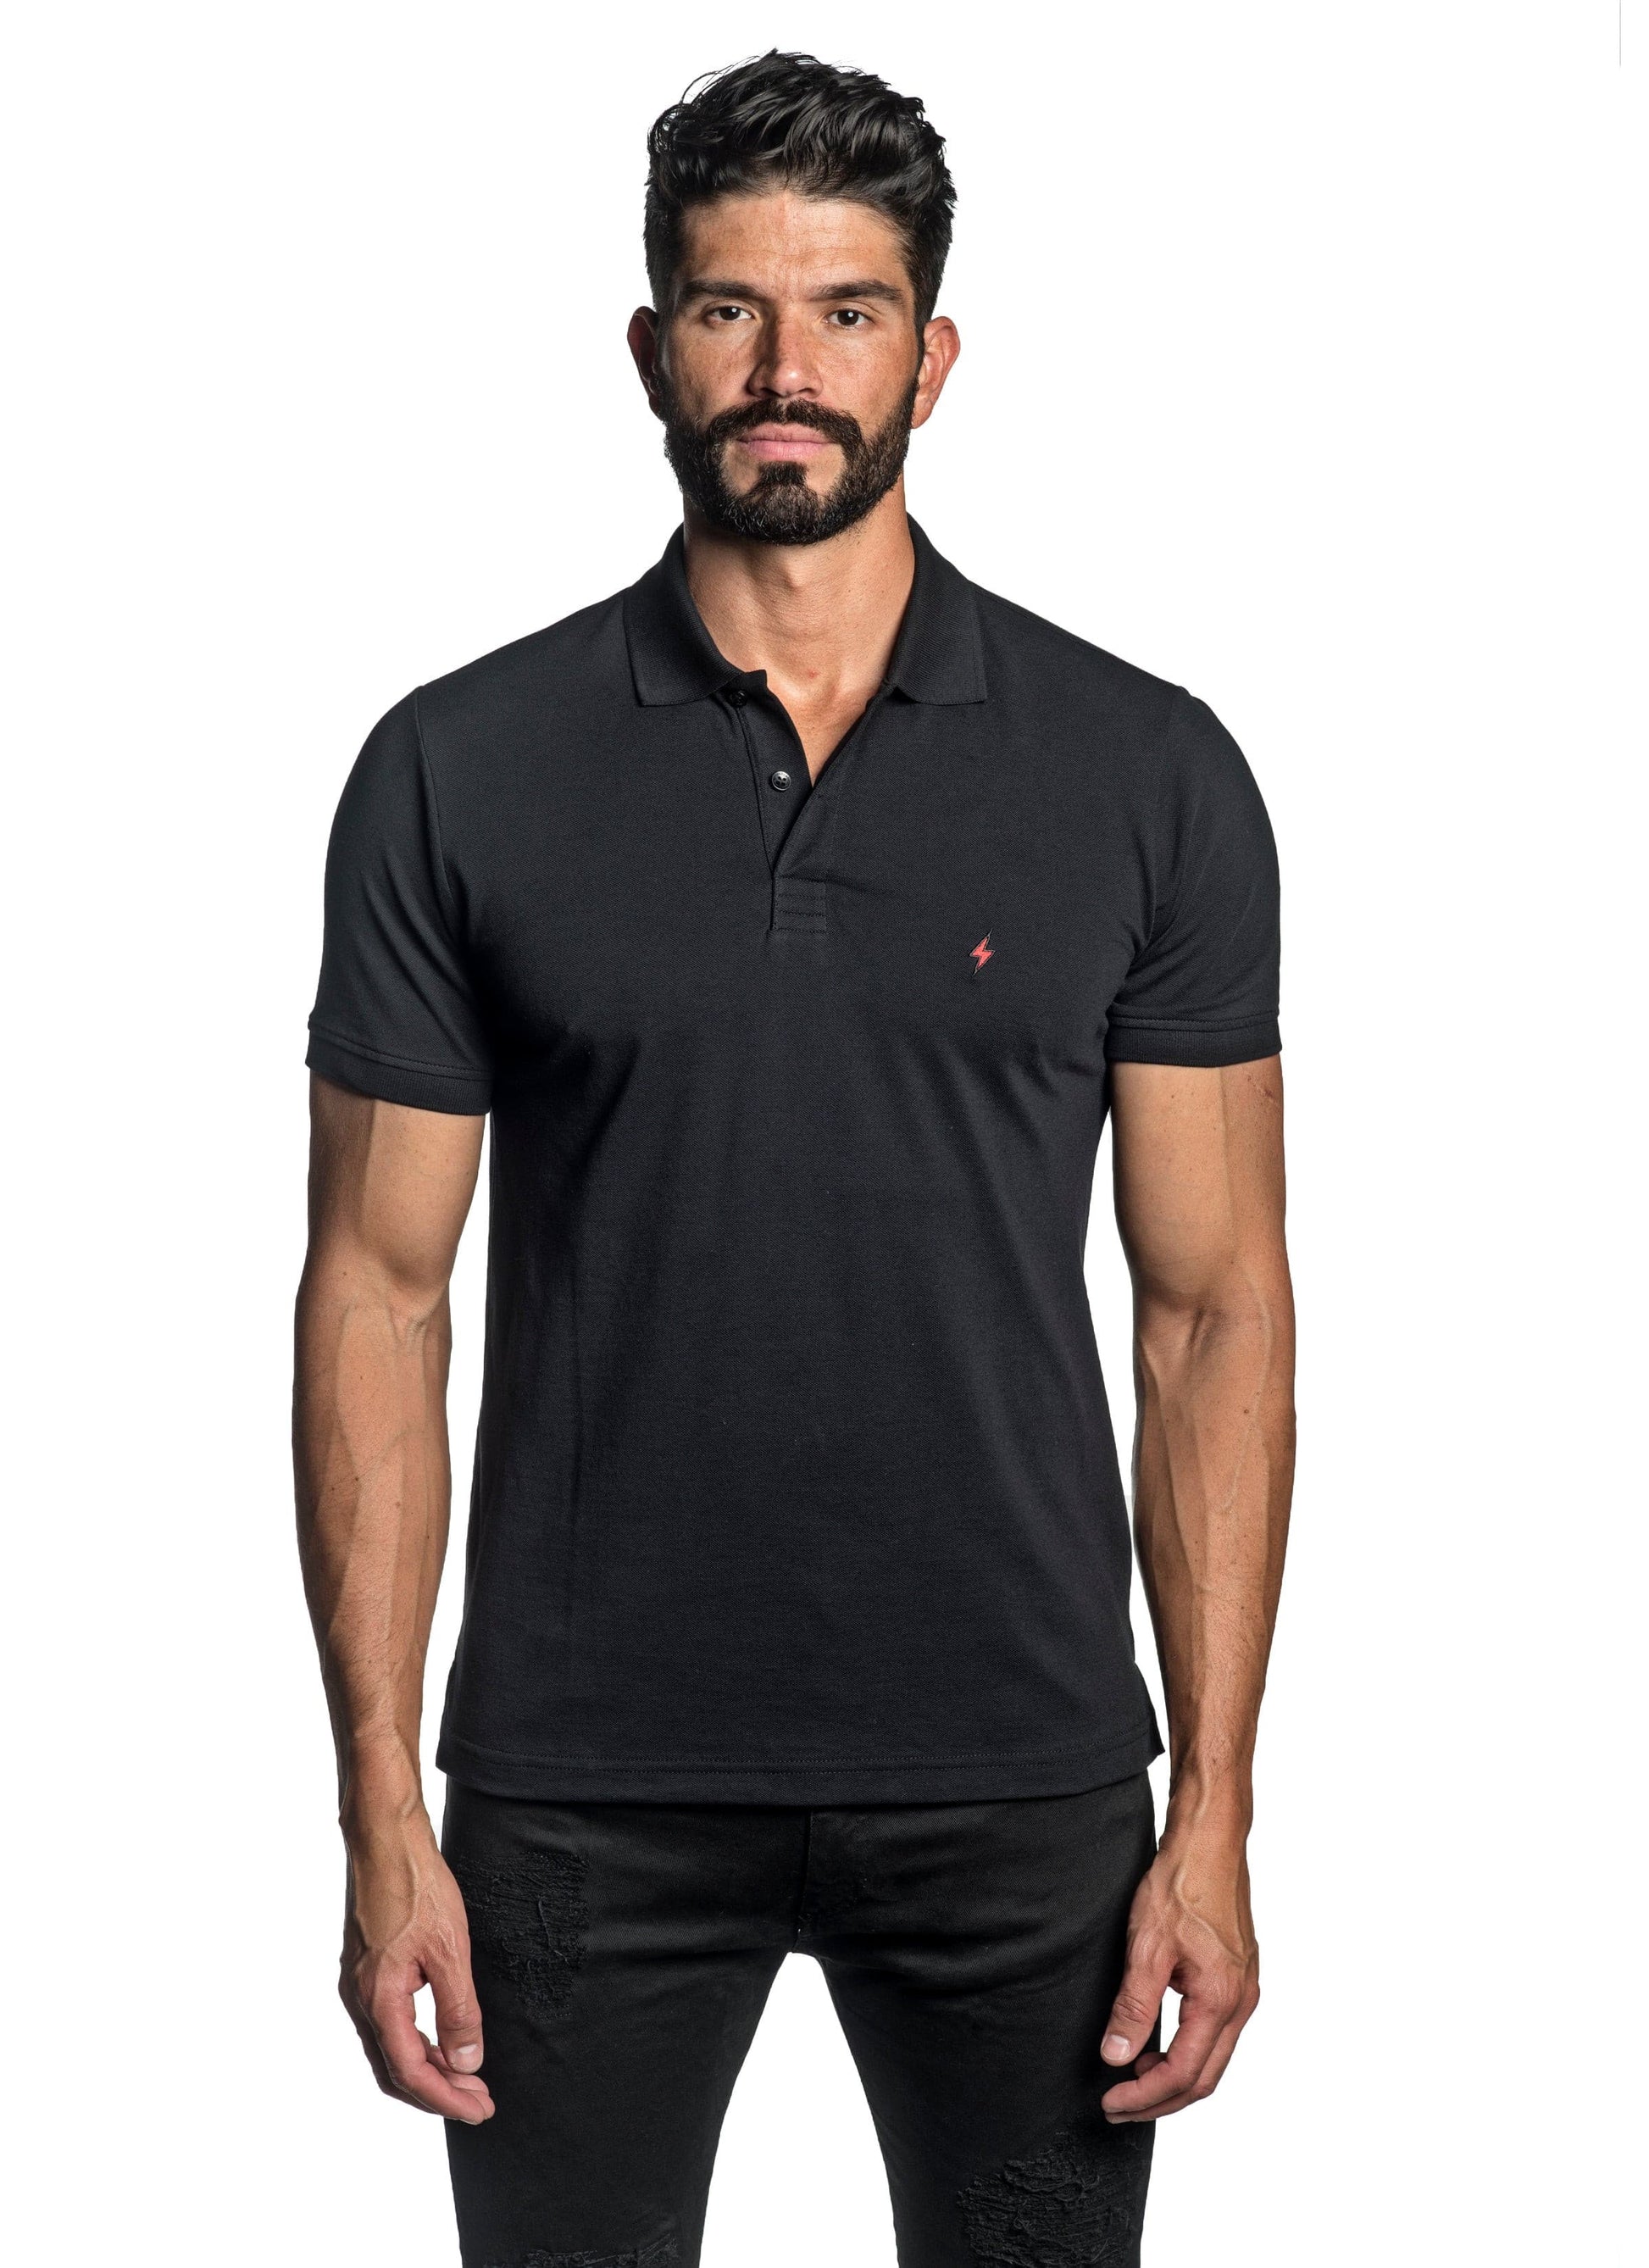 Black with Lightning Pima Cotton Polo for Men P-63.